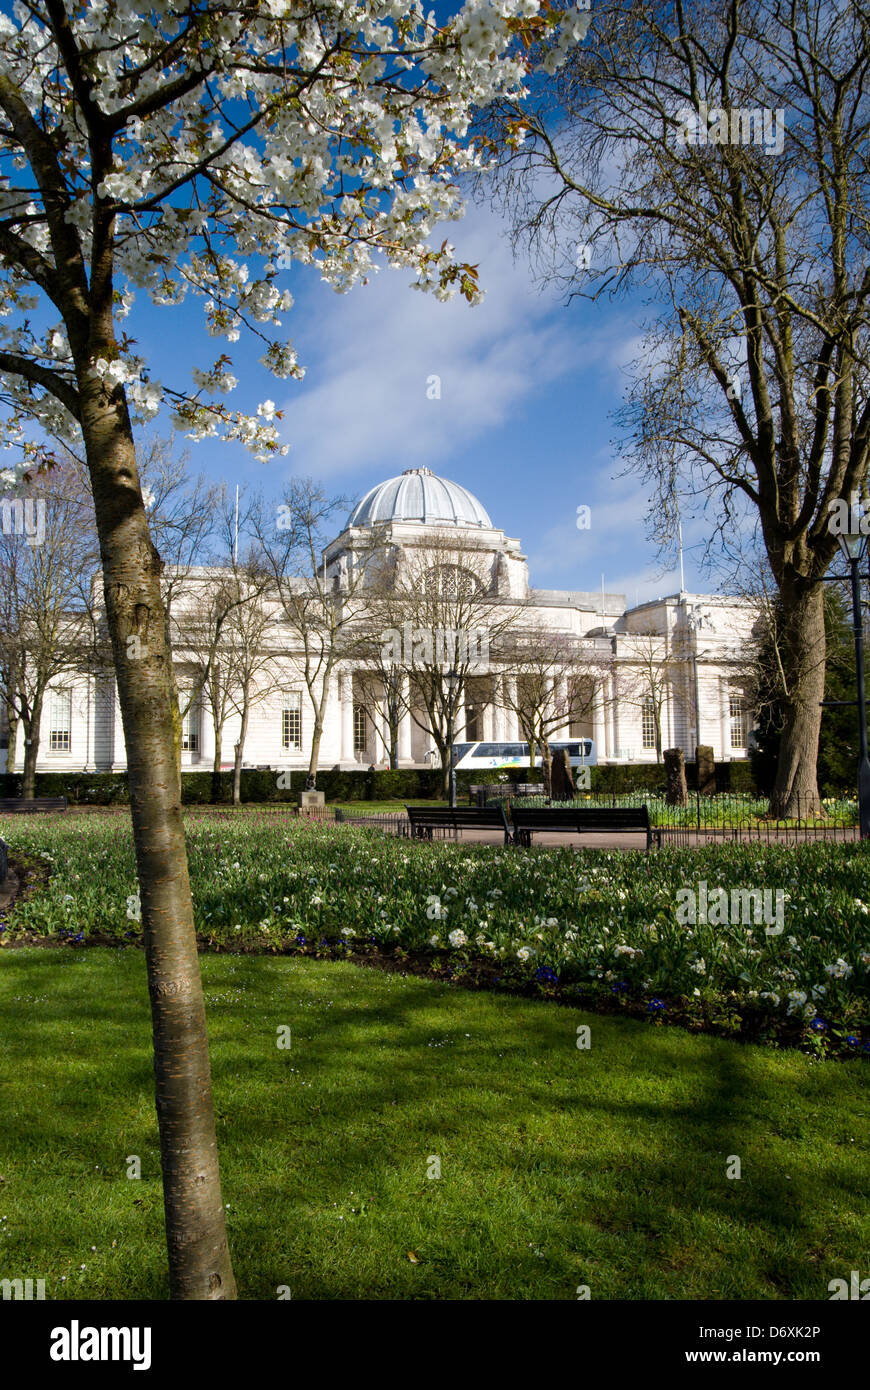 National Museum of Wales from the Gorsedd Gardens, Cathays Park, Cardiff, Wales. Stock Photo